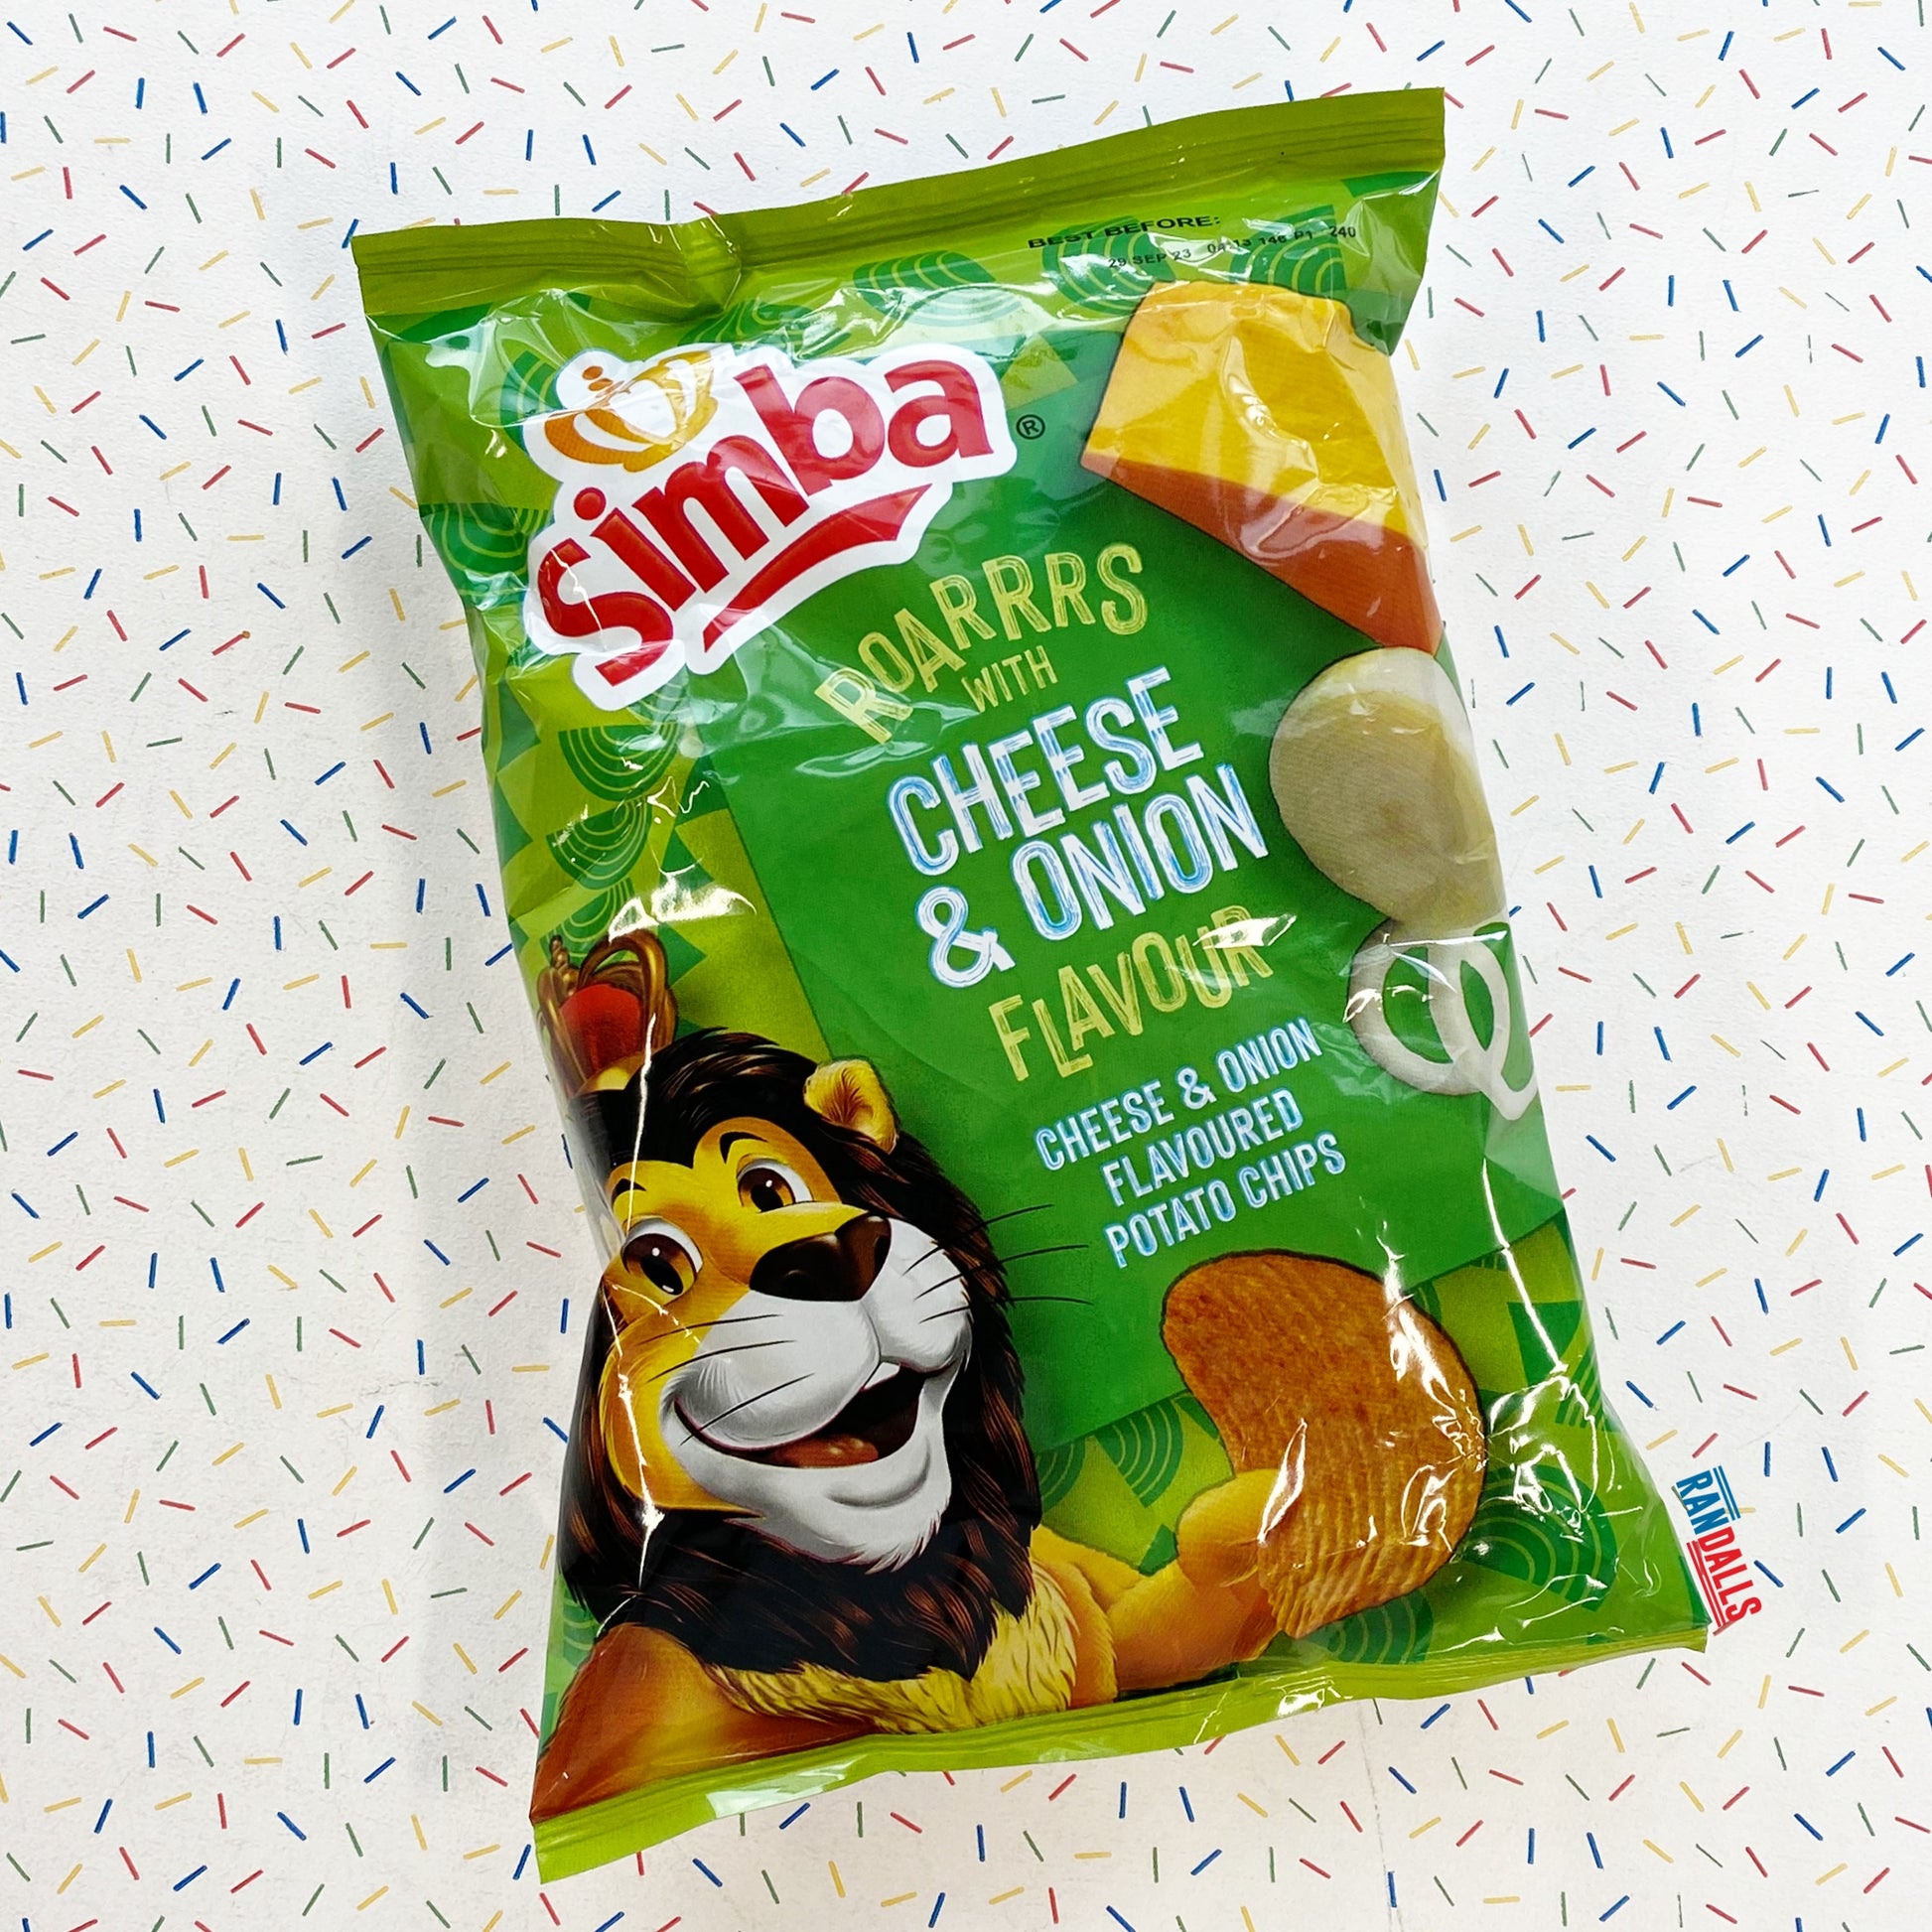 simba chips cheese and onion, ridged crisps, exotic crisps, roarrrs, south africa, randalls,